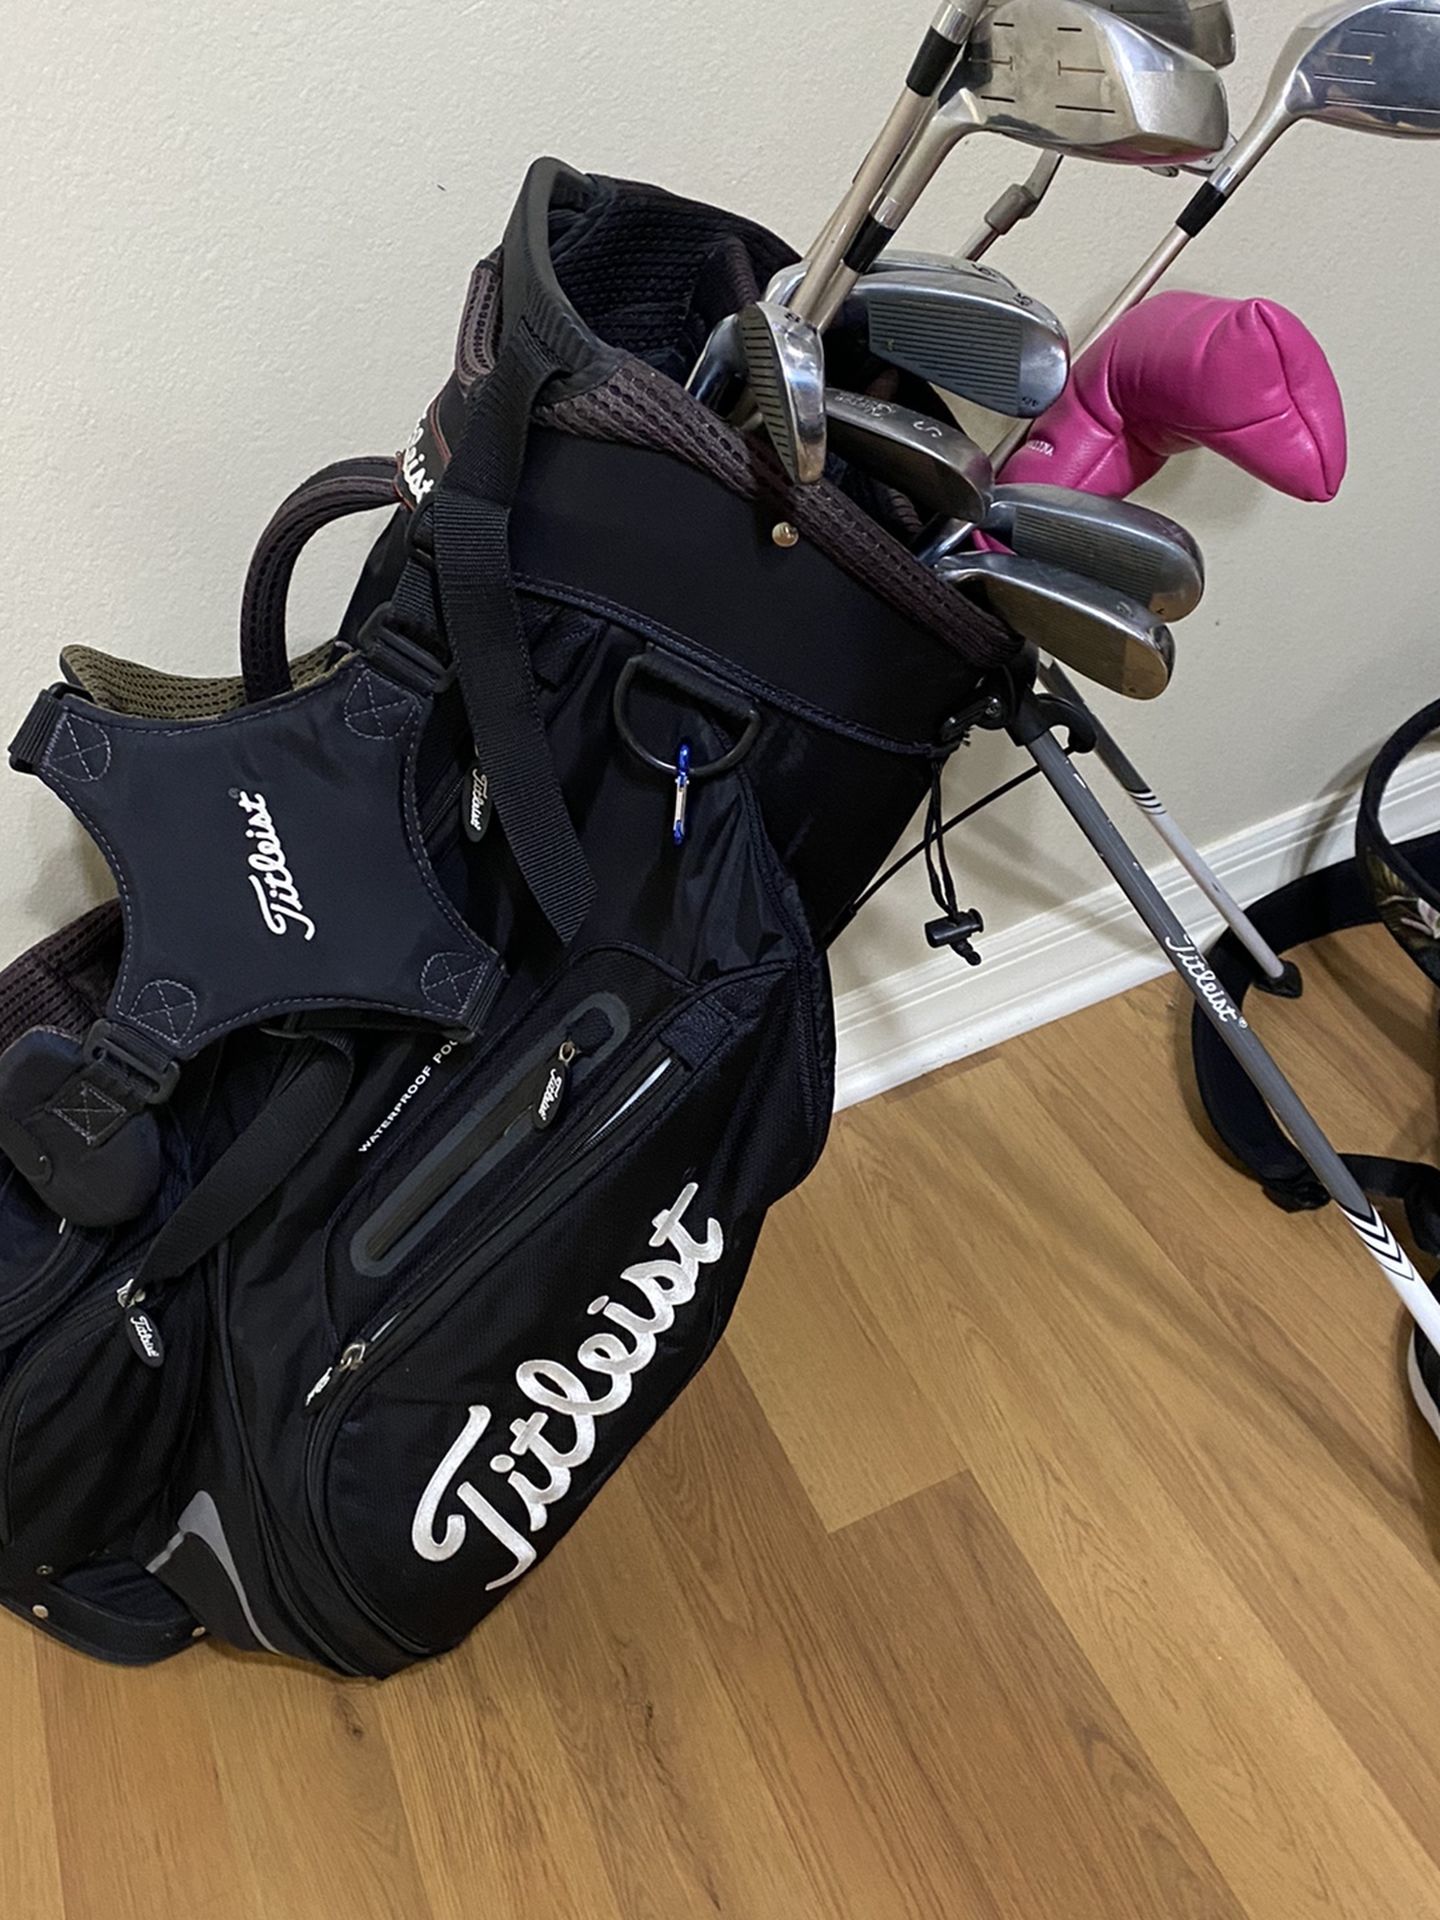 ladies golf clubs and bag